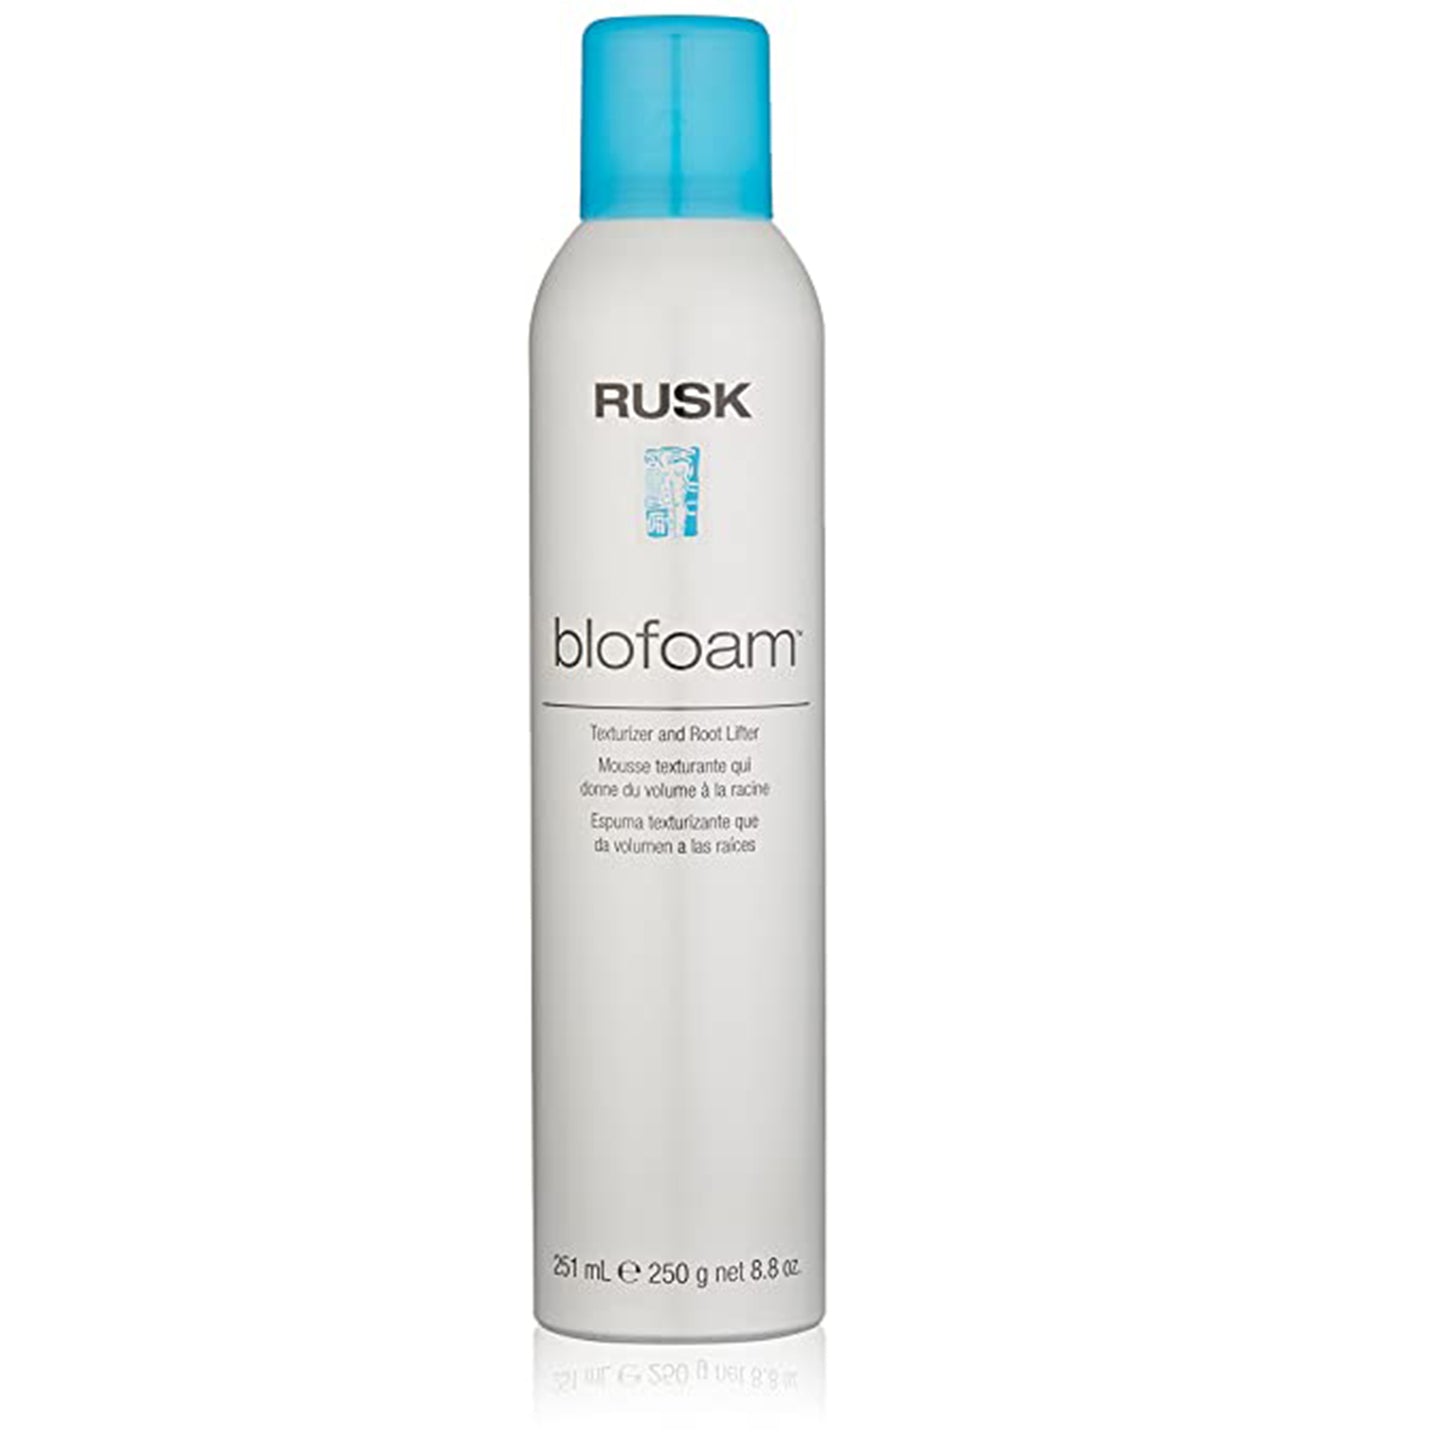 Rusk Blofoam Texturizer and Root Lifter 8.8 oz